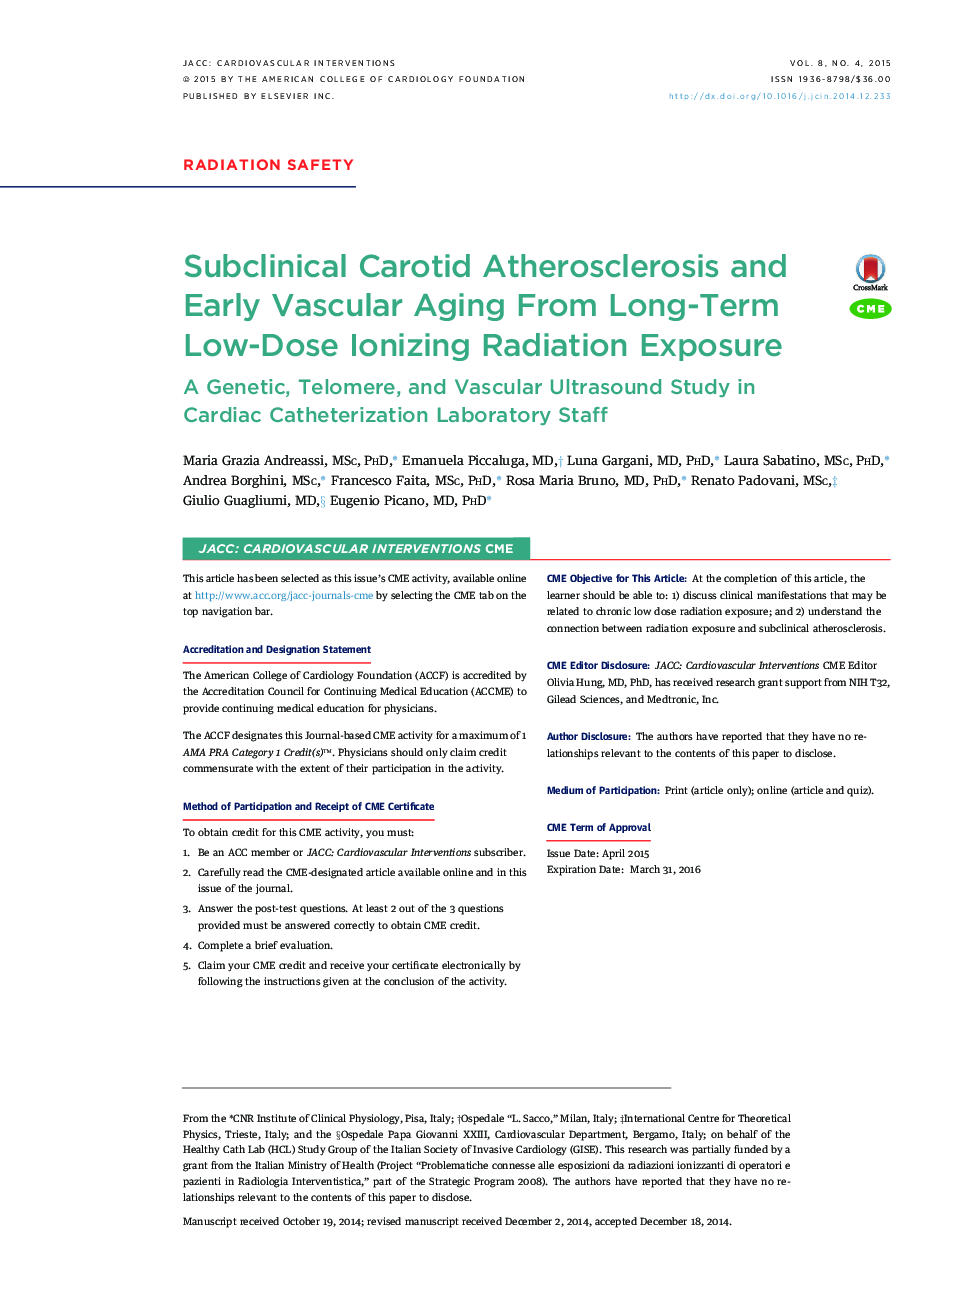 Subclinical Carotid Atherosclerosis and Early Vascular Aging From Long-Term Low-Dose Ionizing Radiation Exposure : A Genetic, Telomere, and Vascular Ultrasound Study in Cardiac Catheterization Laboratory Staff